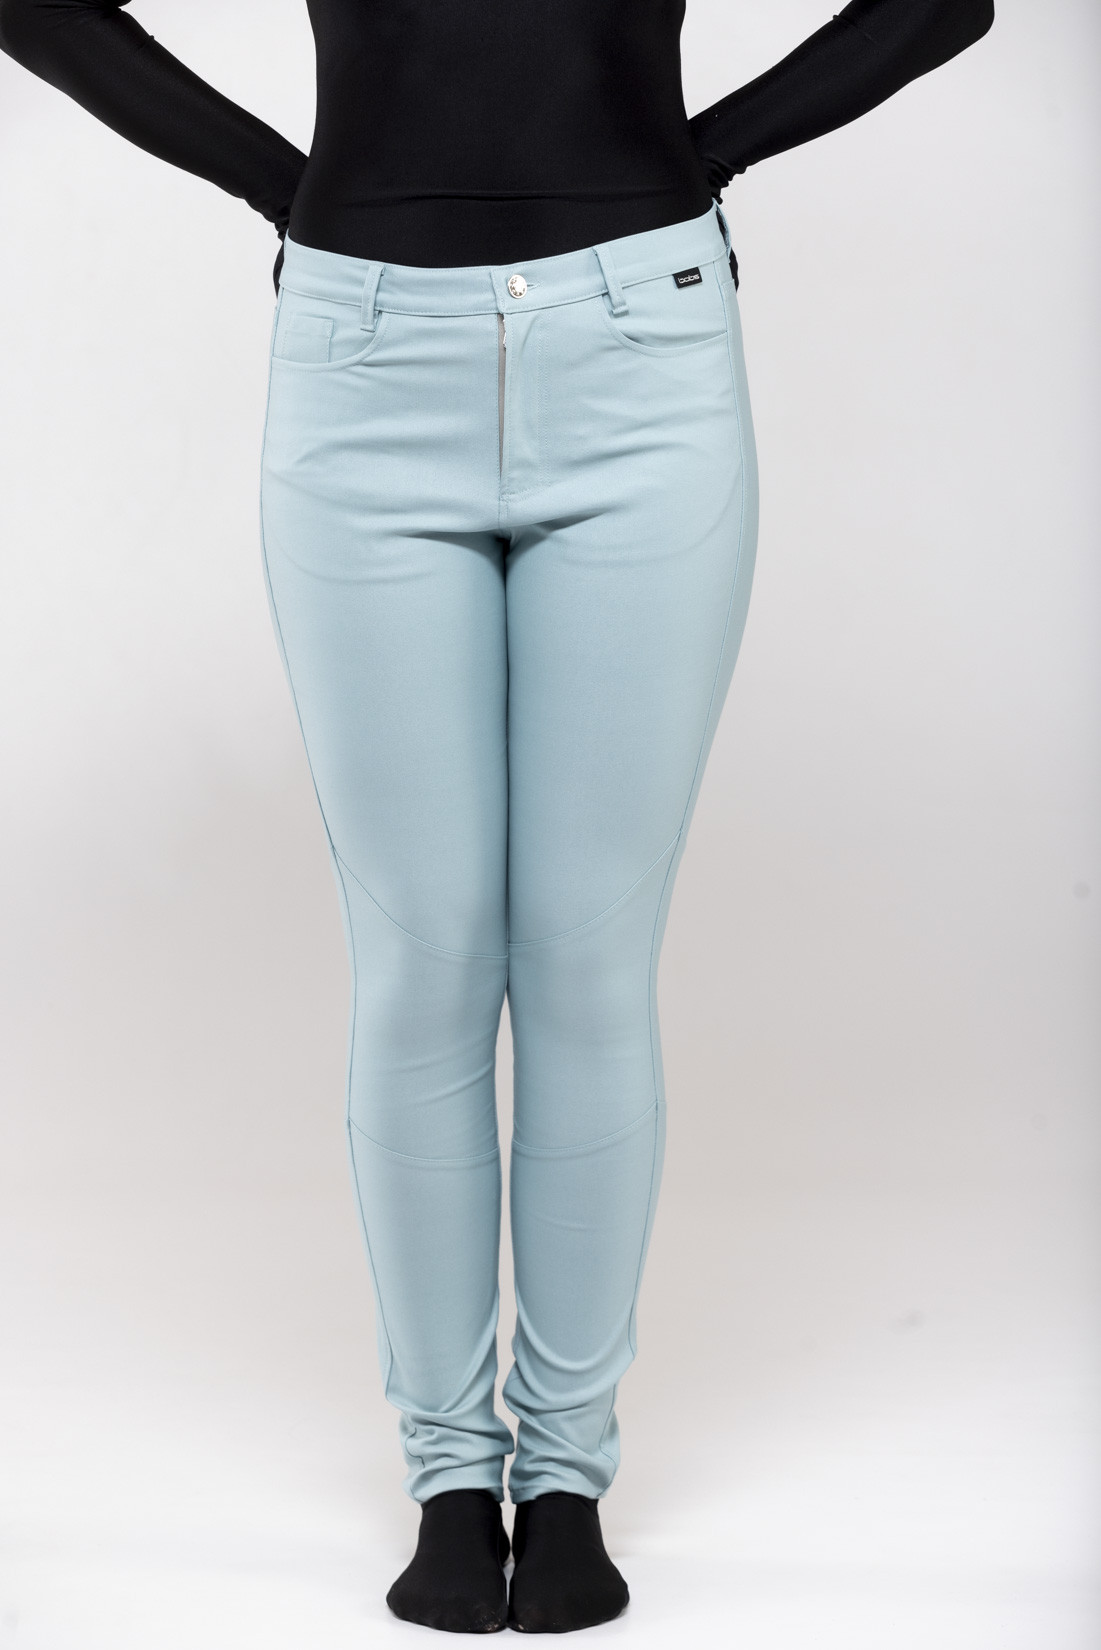 Stretchjeans "magical mint"